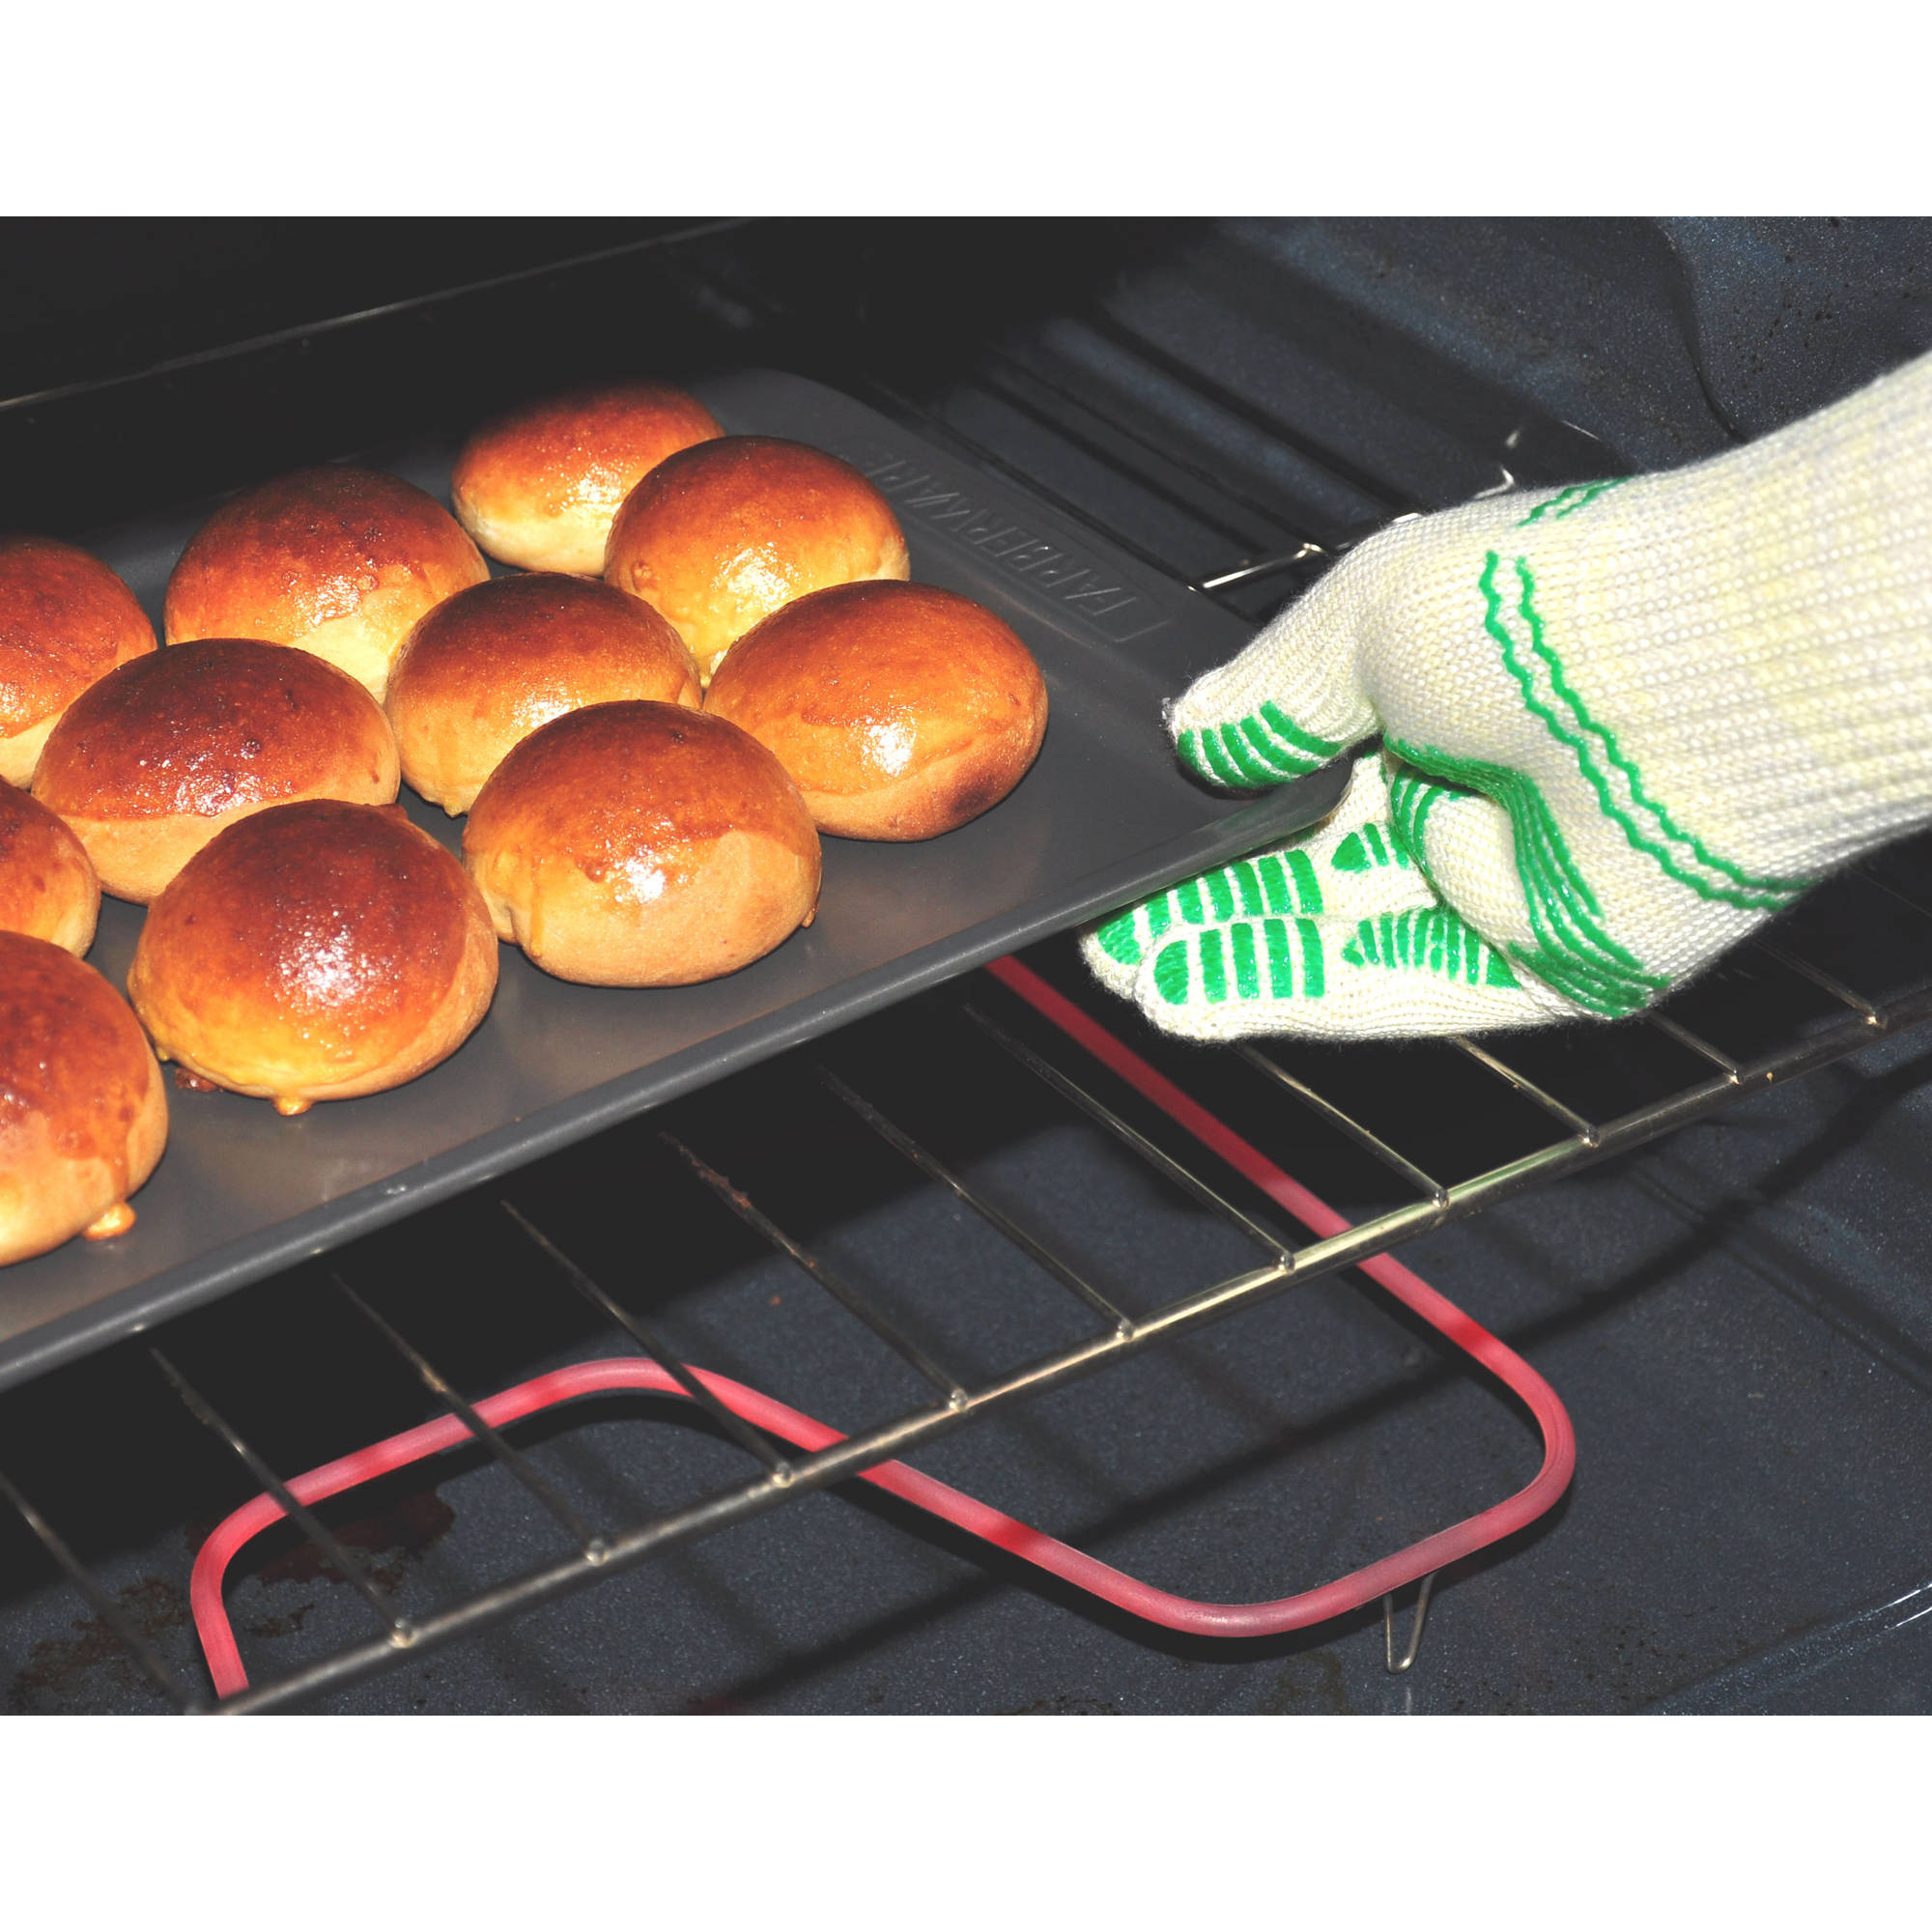 G & F Products Heat-Resistant Fireplace Gloves, Extra Long Cuff, 1 Piece - image 2 of 7